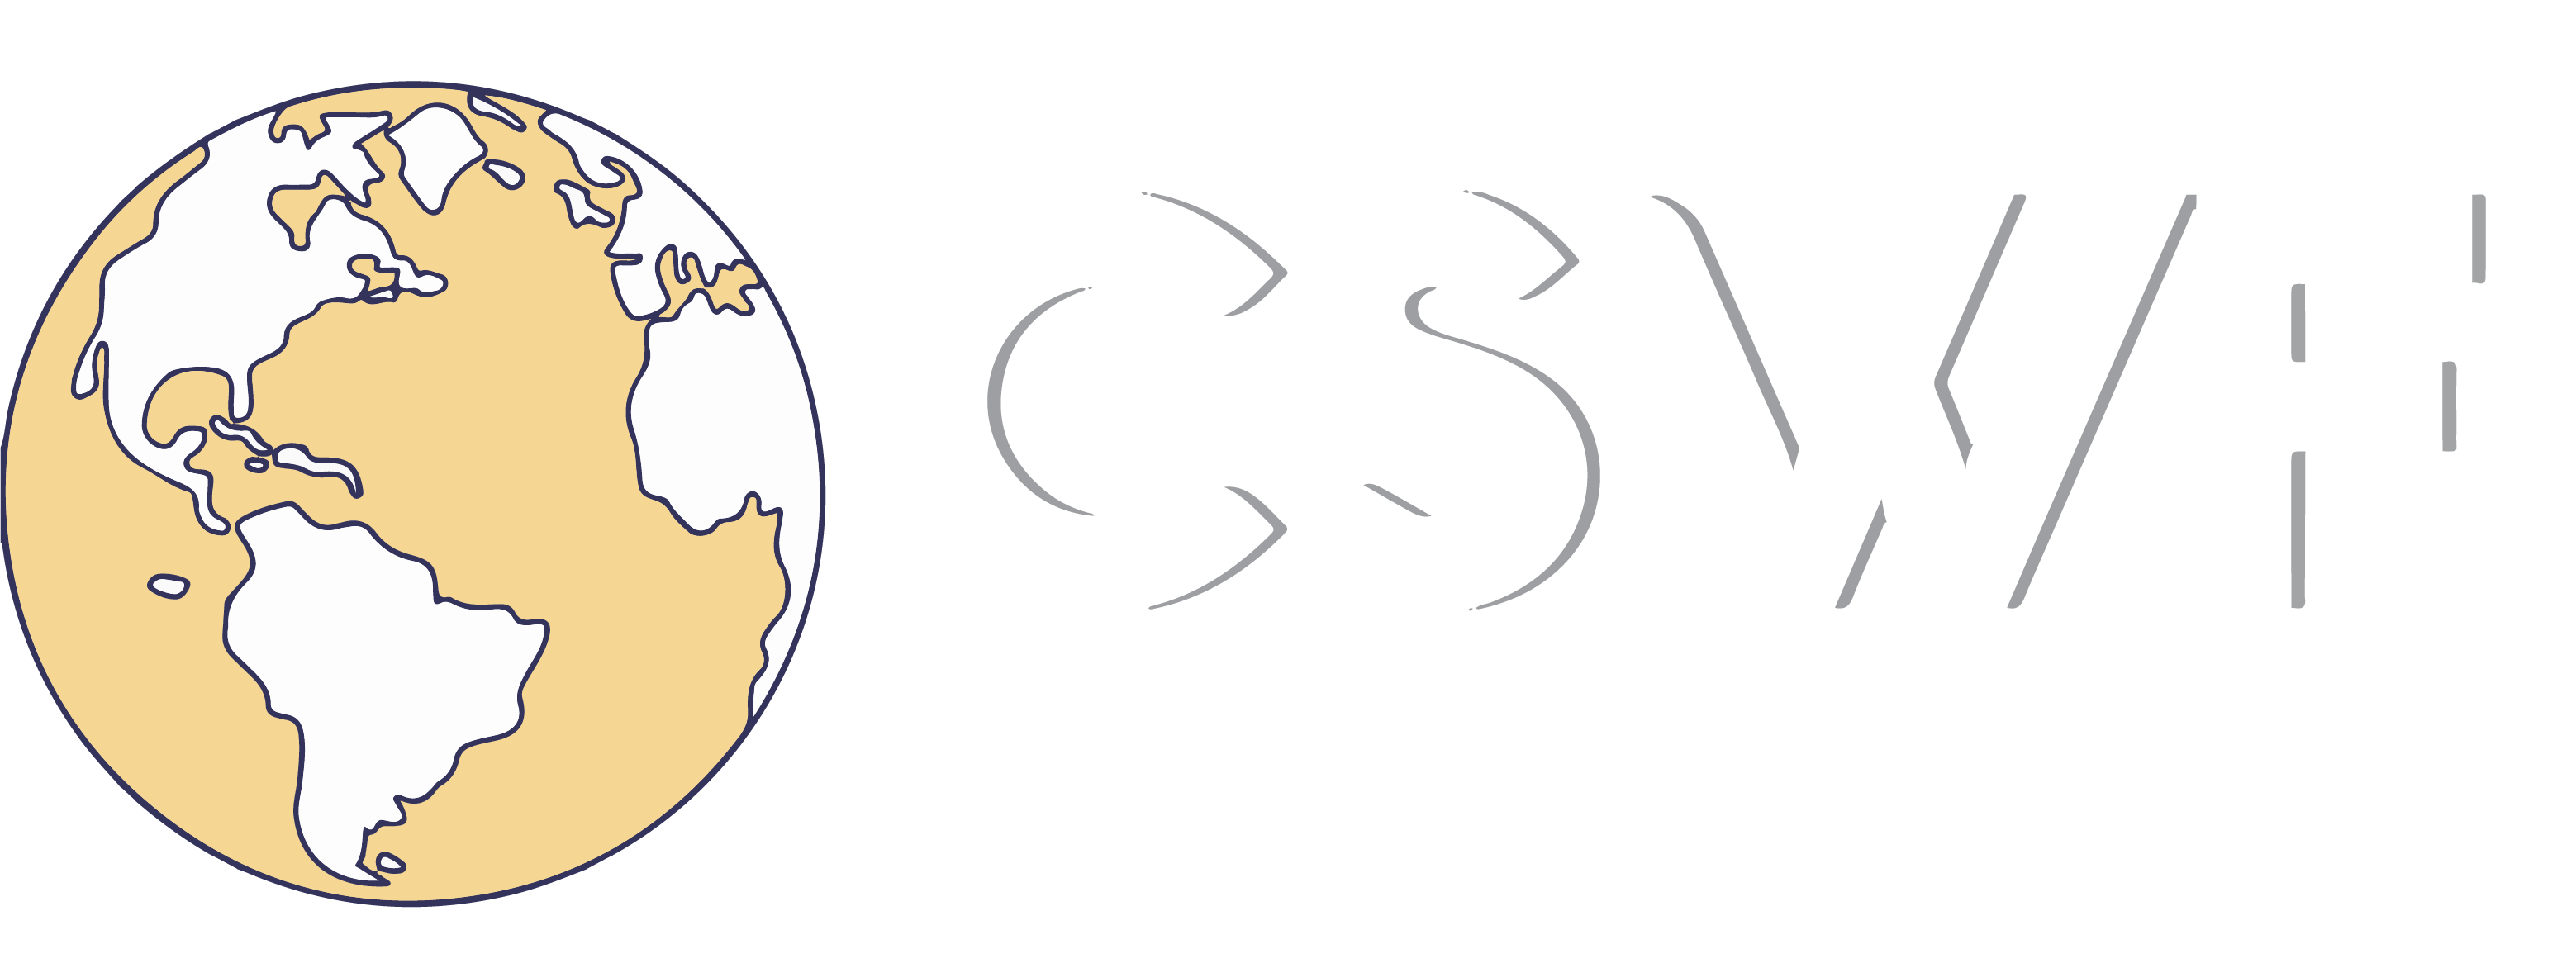 CSWF Logo in white<br />
